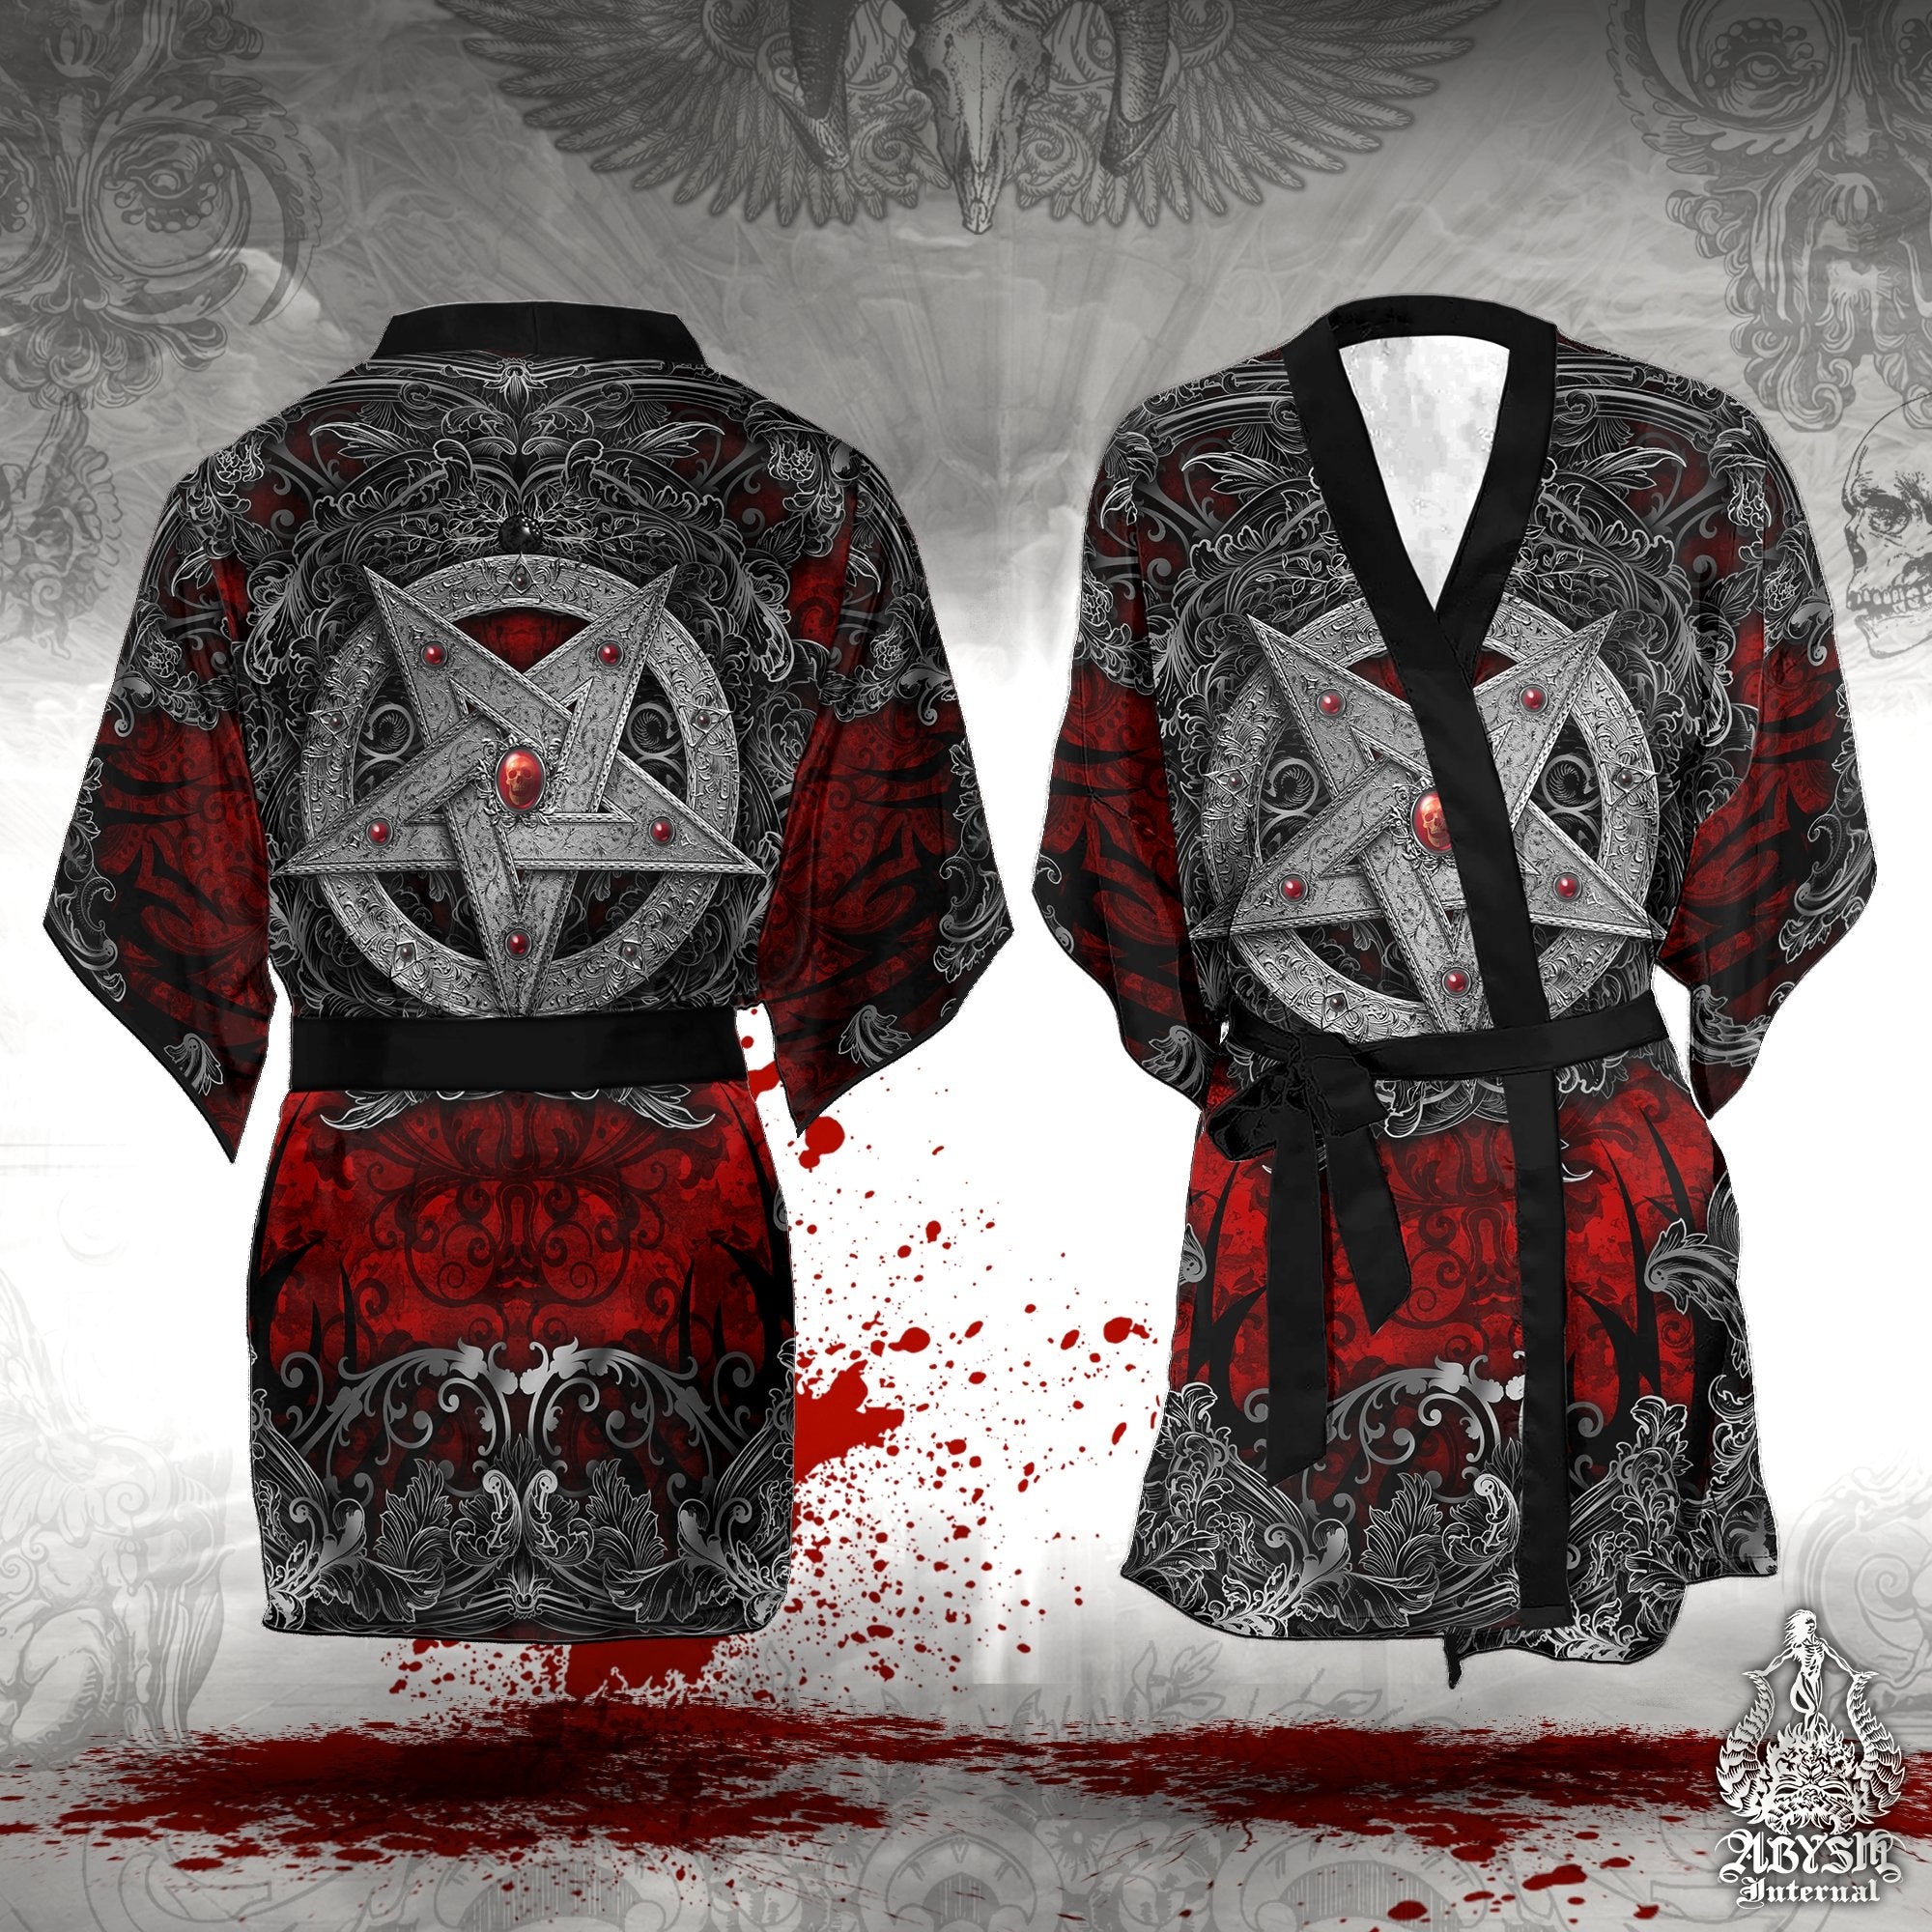 Pentagram Cover Up, Beach Outfit, Party Kimono, Metal Summer Festival Robe, Satanic Gothic Indie and Alternative Clothing, Unisex - Silver Red - Abysm Internal